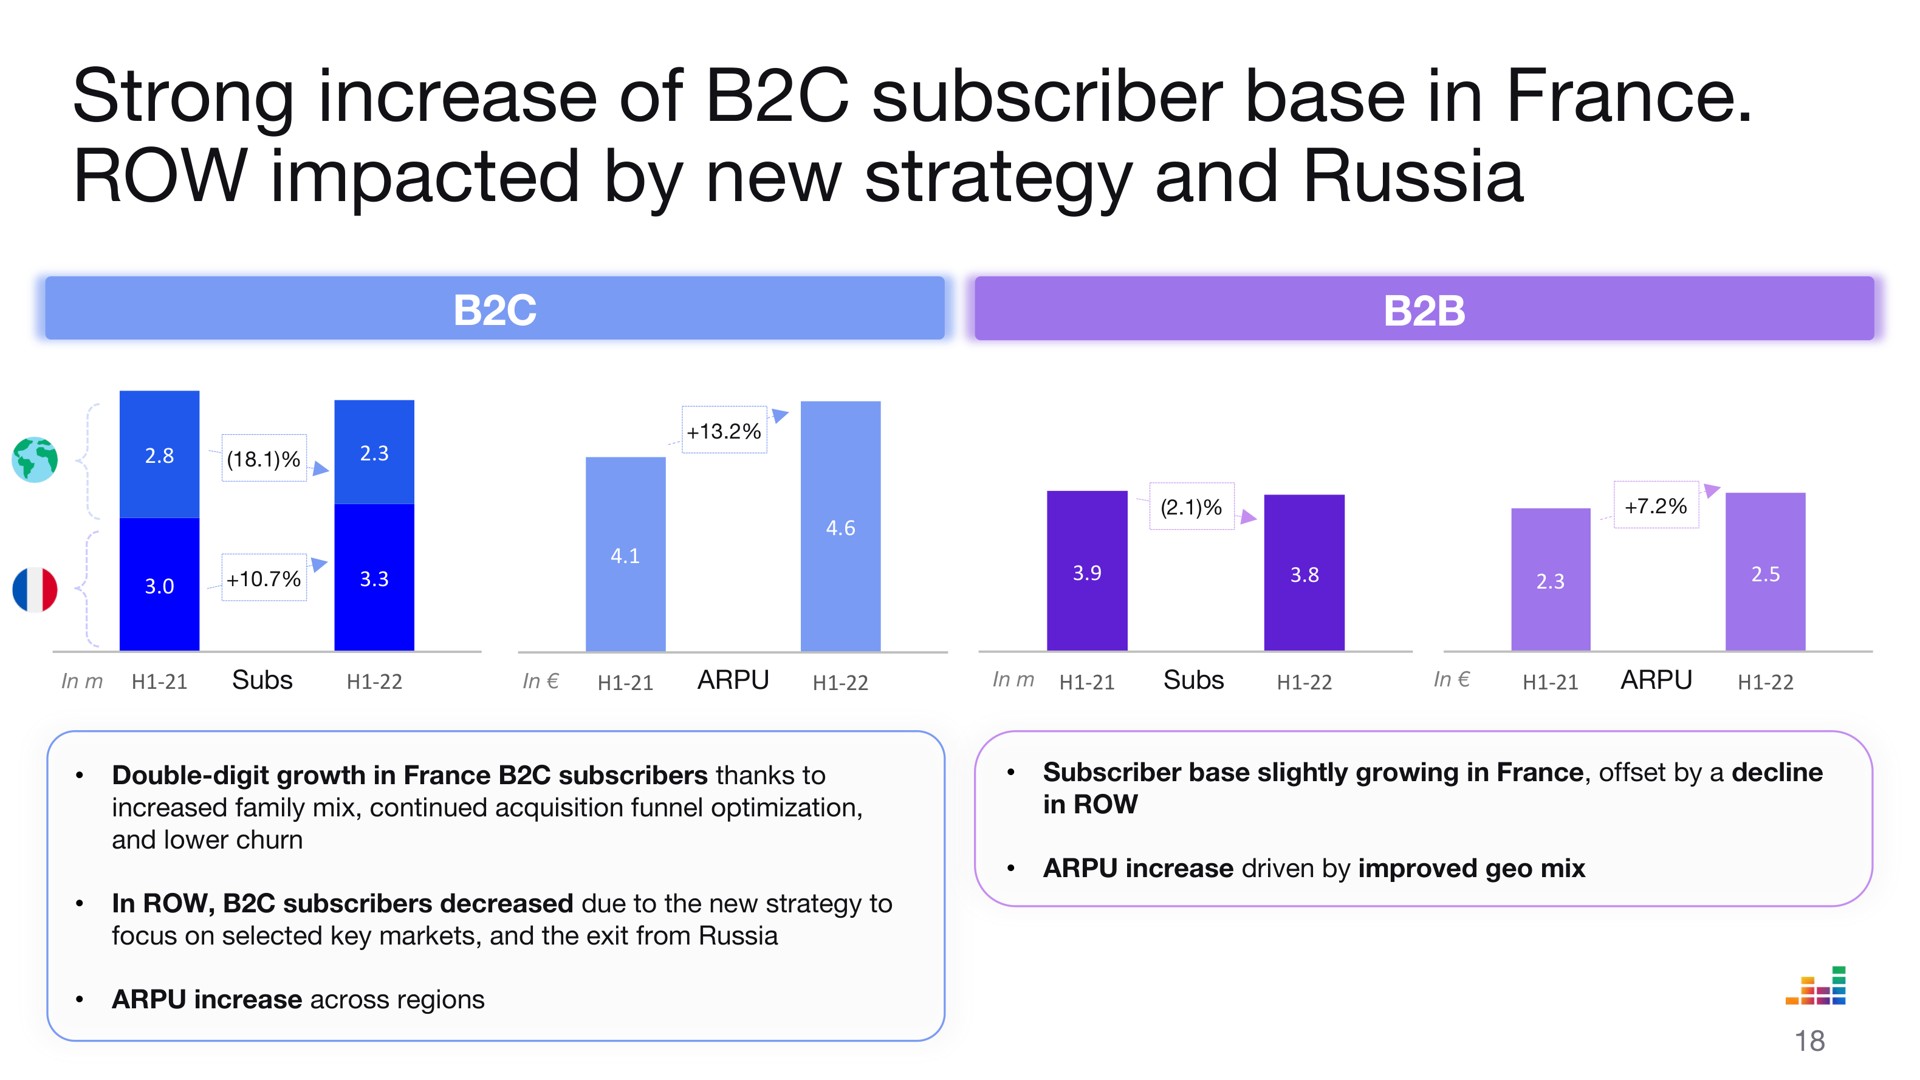 strong increase of subscriber base in row impacted by new strategy and russia | Deezer